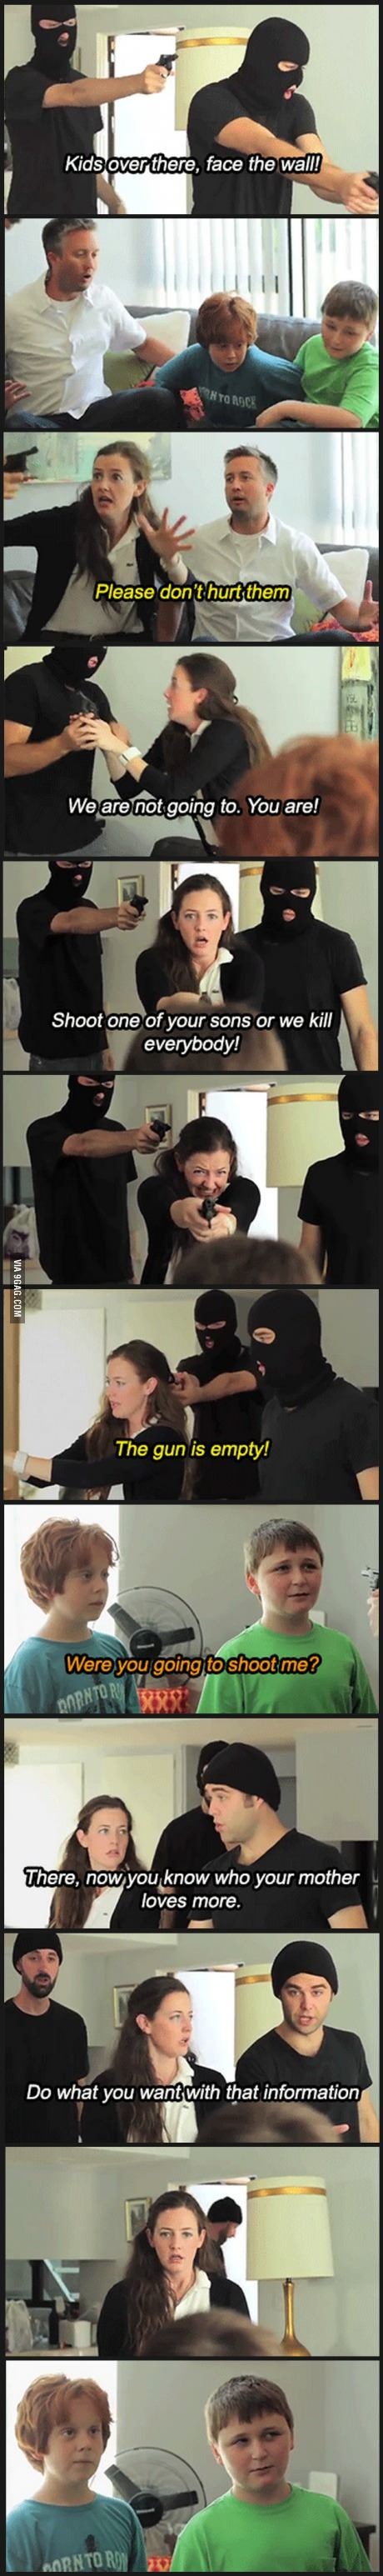 now you know who your mother loves more - Kids over there, face the wall! To Roce Please don't hurt them We are not going to. You are! Shoot one of your sons or we kill everybody! Via 9GAG.Com The gun is empty! Were you going to shoot me? Morntor There, n